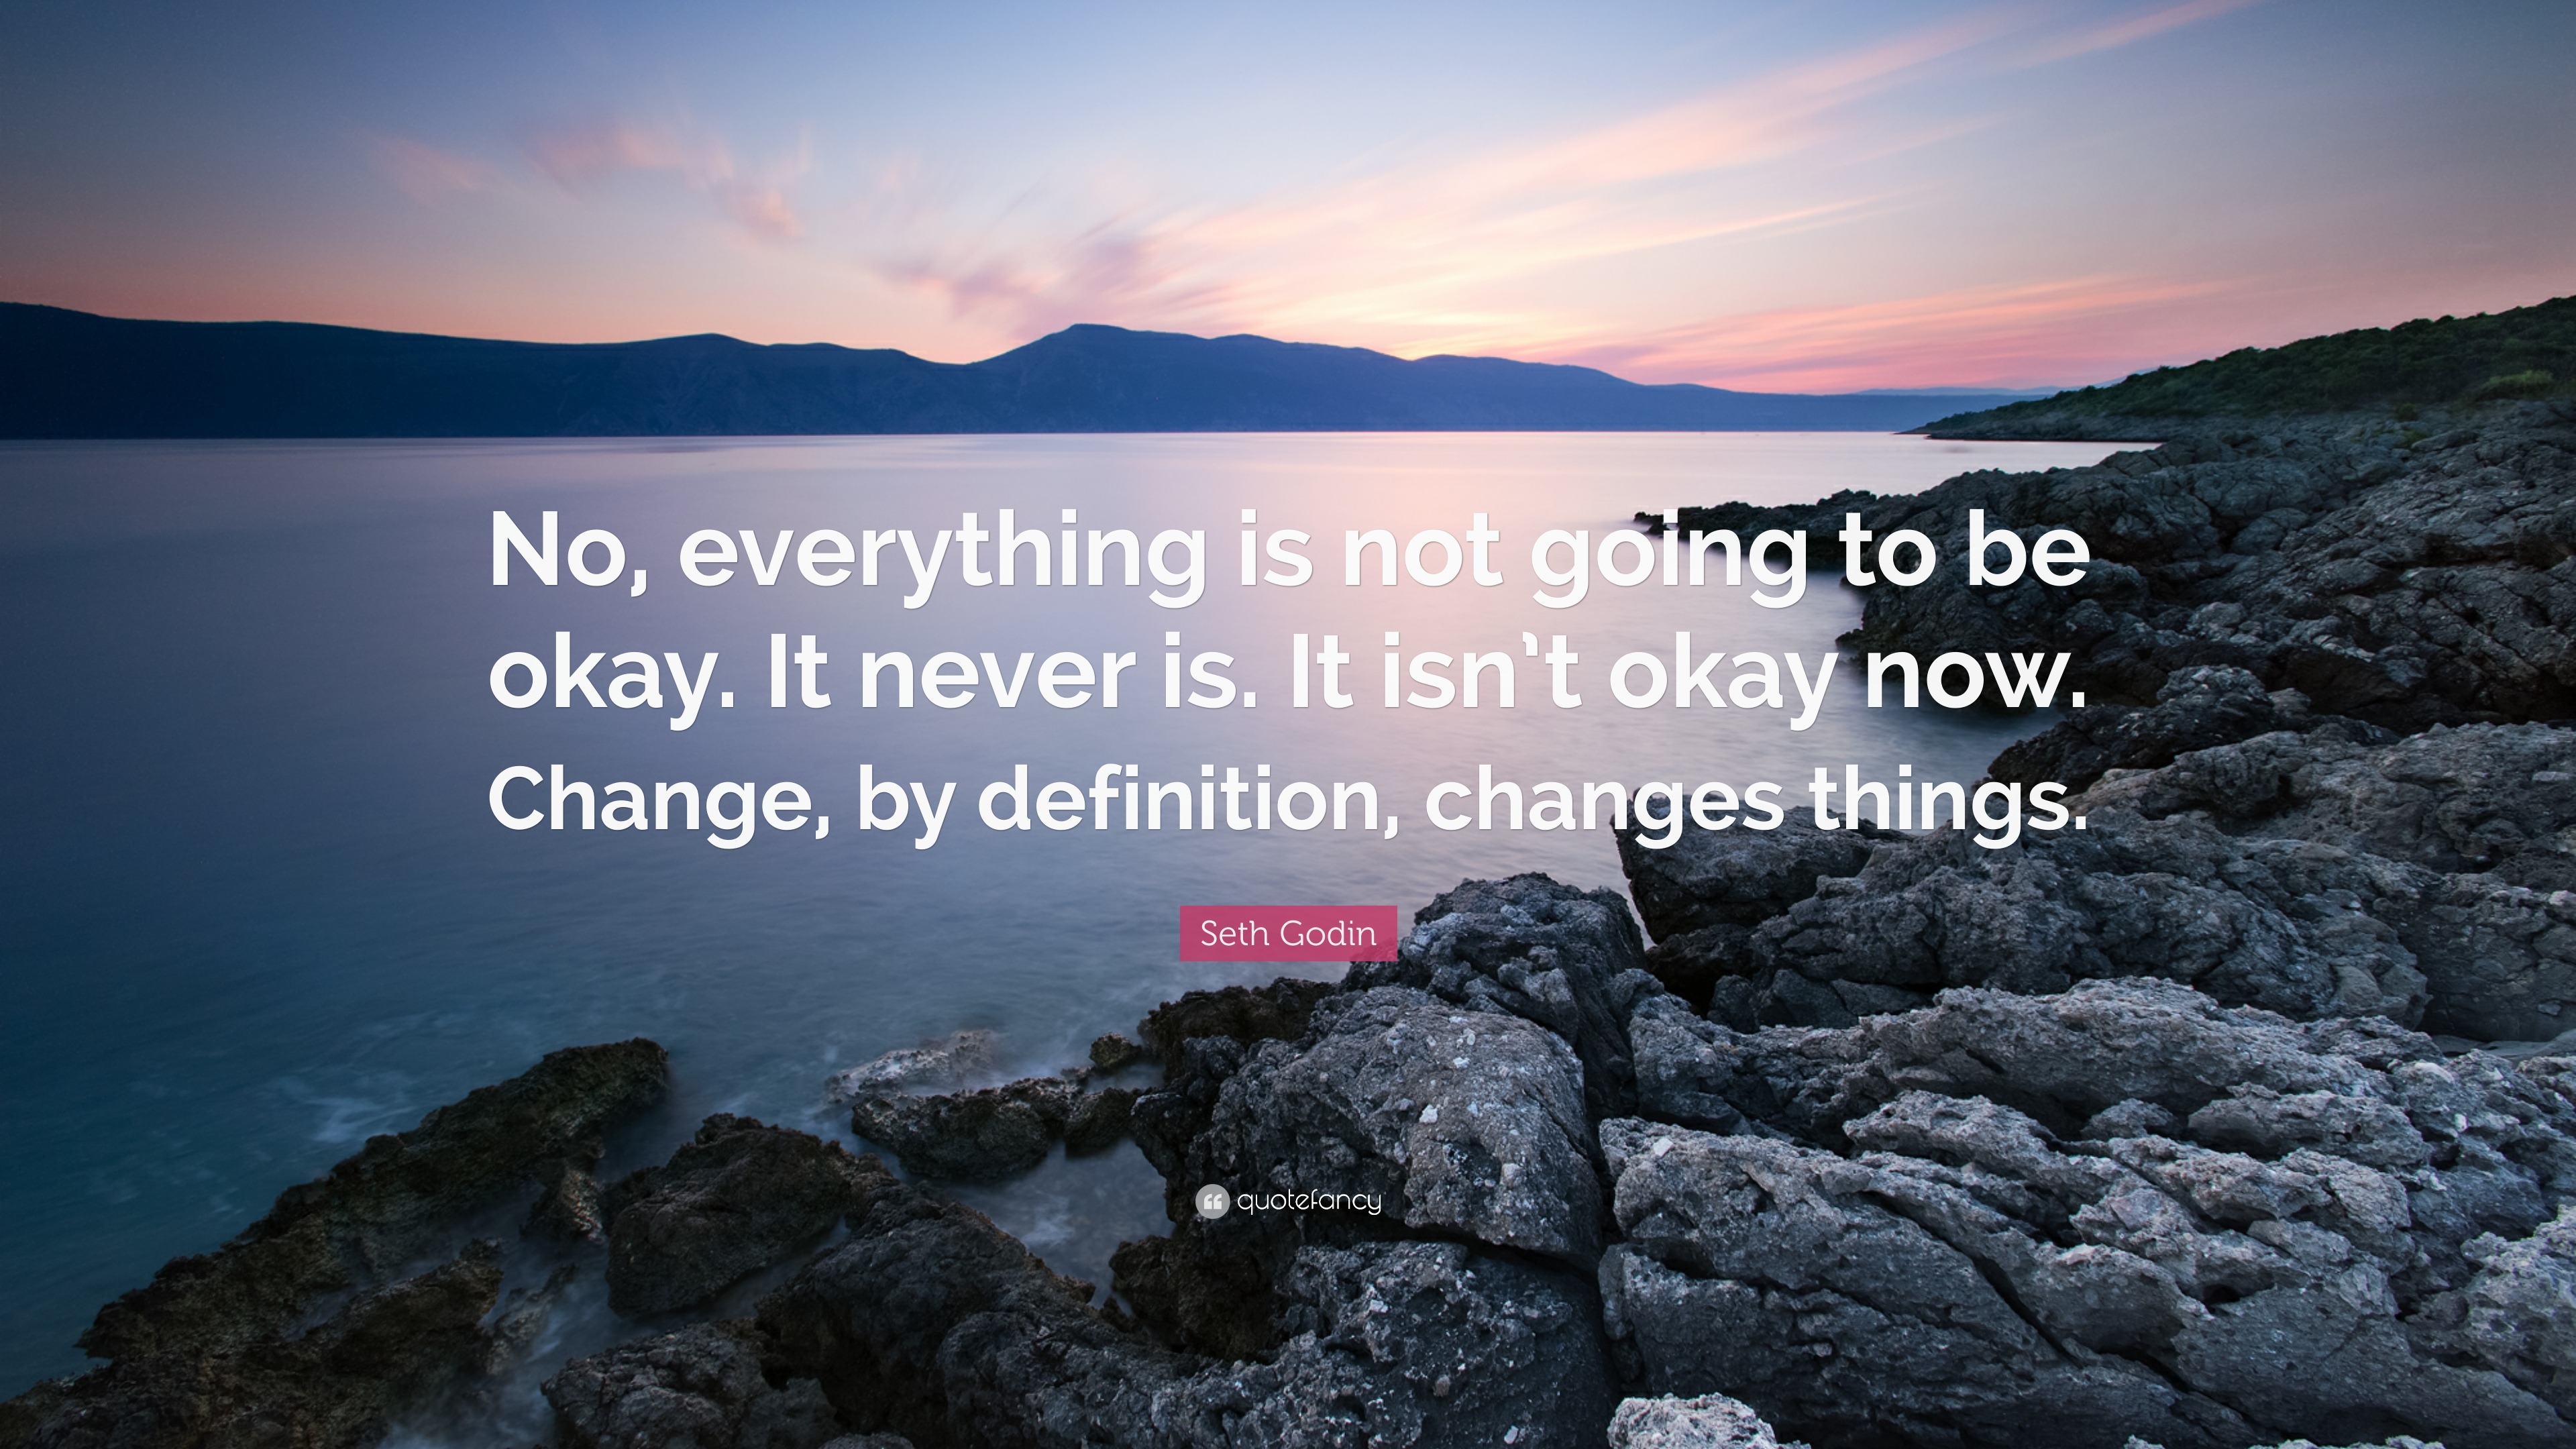 Seth Godin Quote: “No, everything is not going to be okay. It never is ...